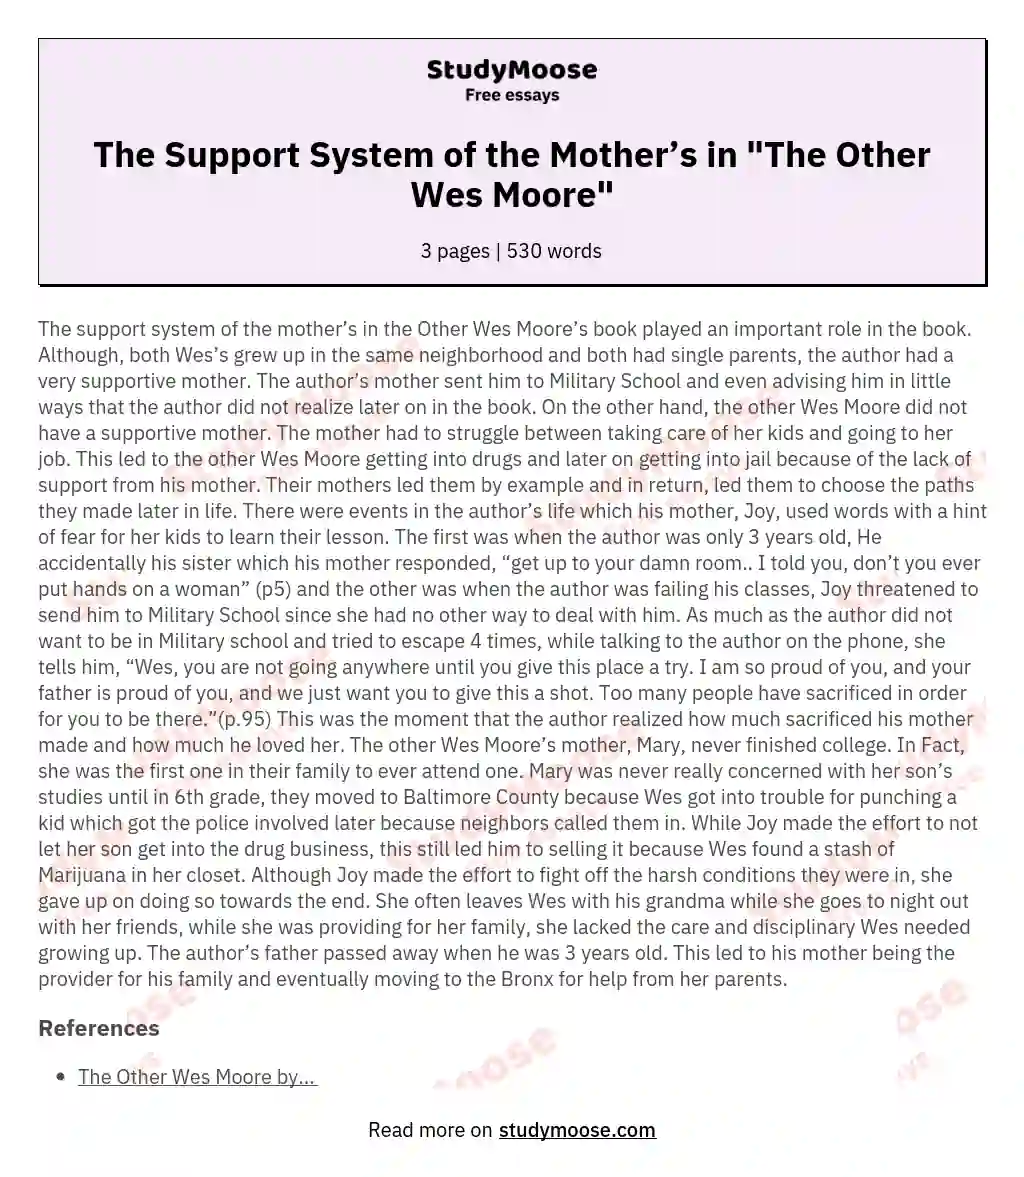 The Support System of the Mother’s in "The Other Wes Moore" essay